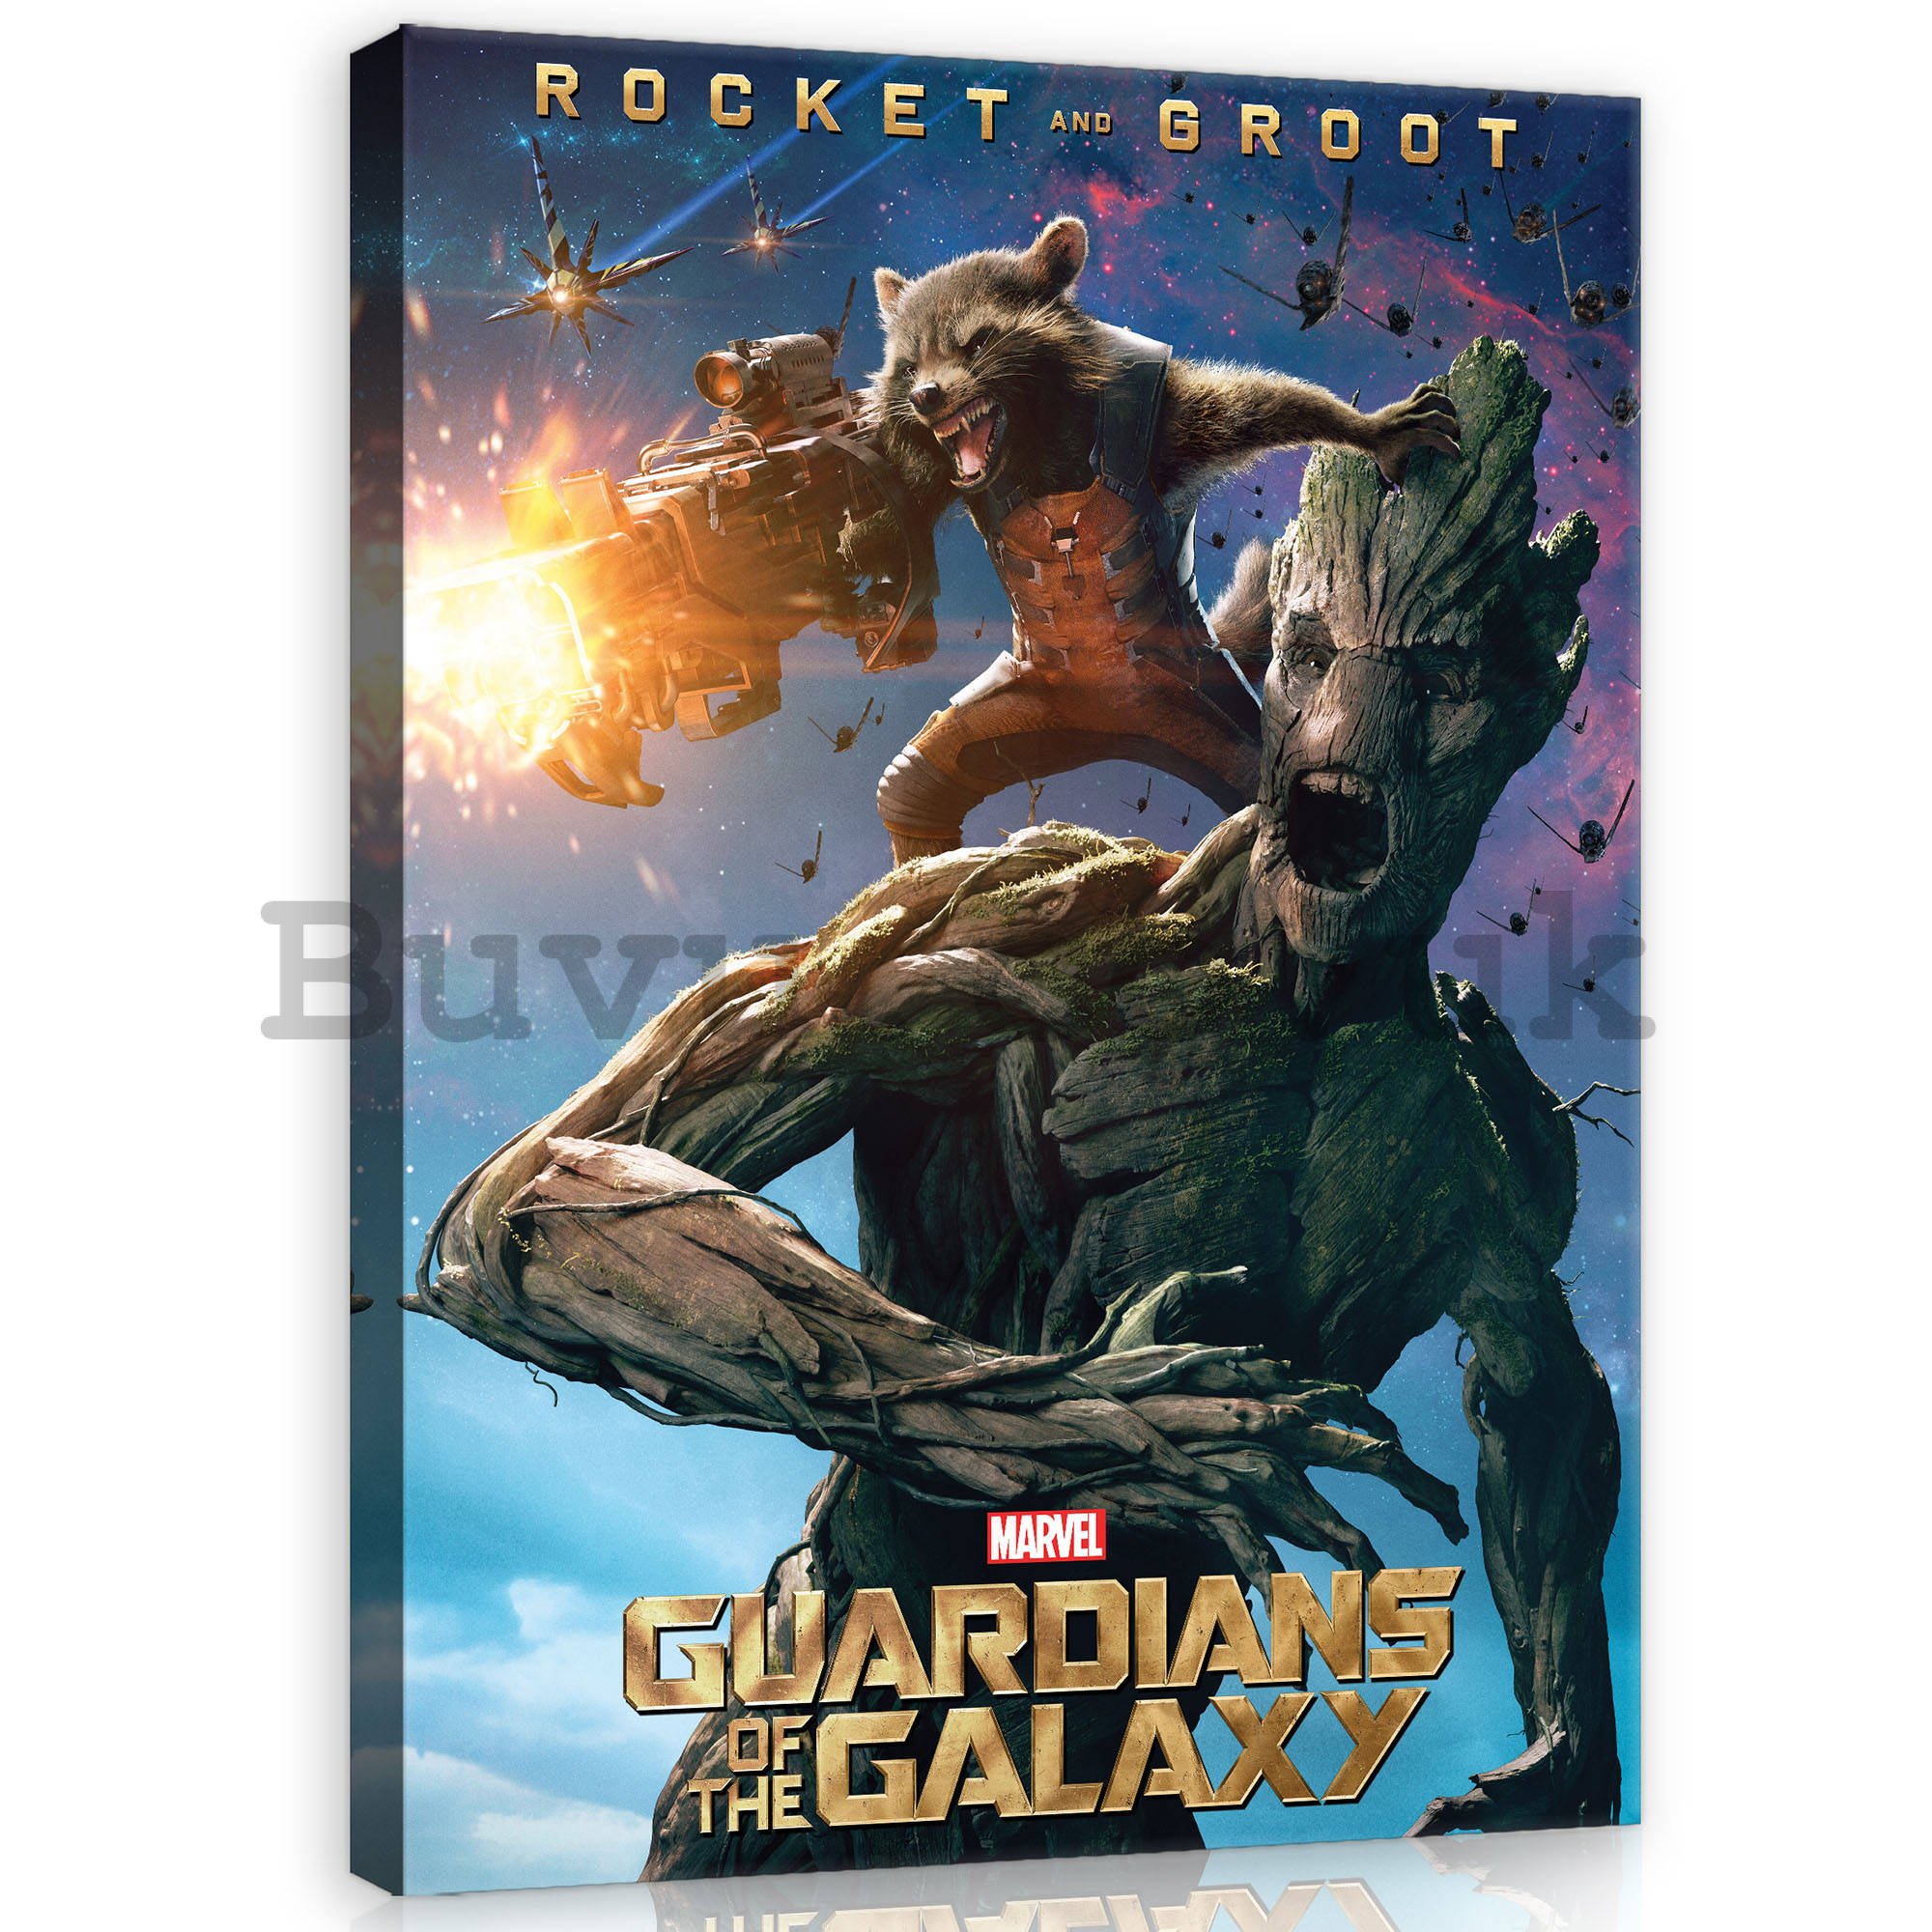 Painting on canvas: Guardians of The Galaxy Rocket & Groot - 60x80 cm